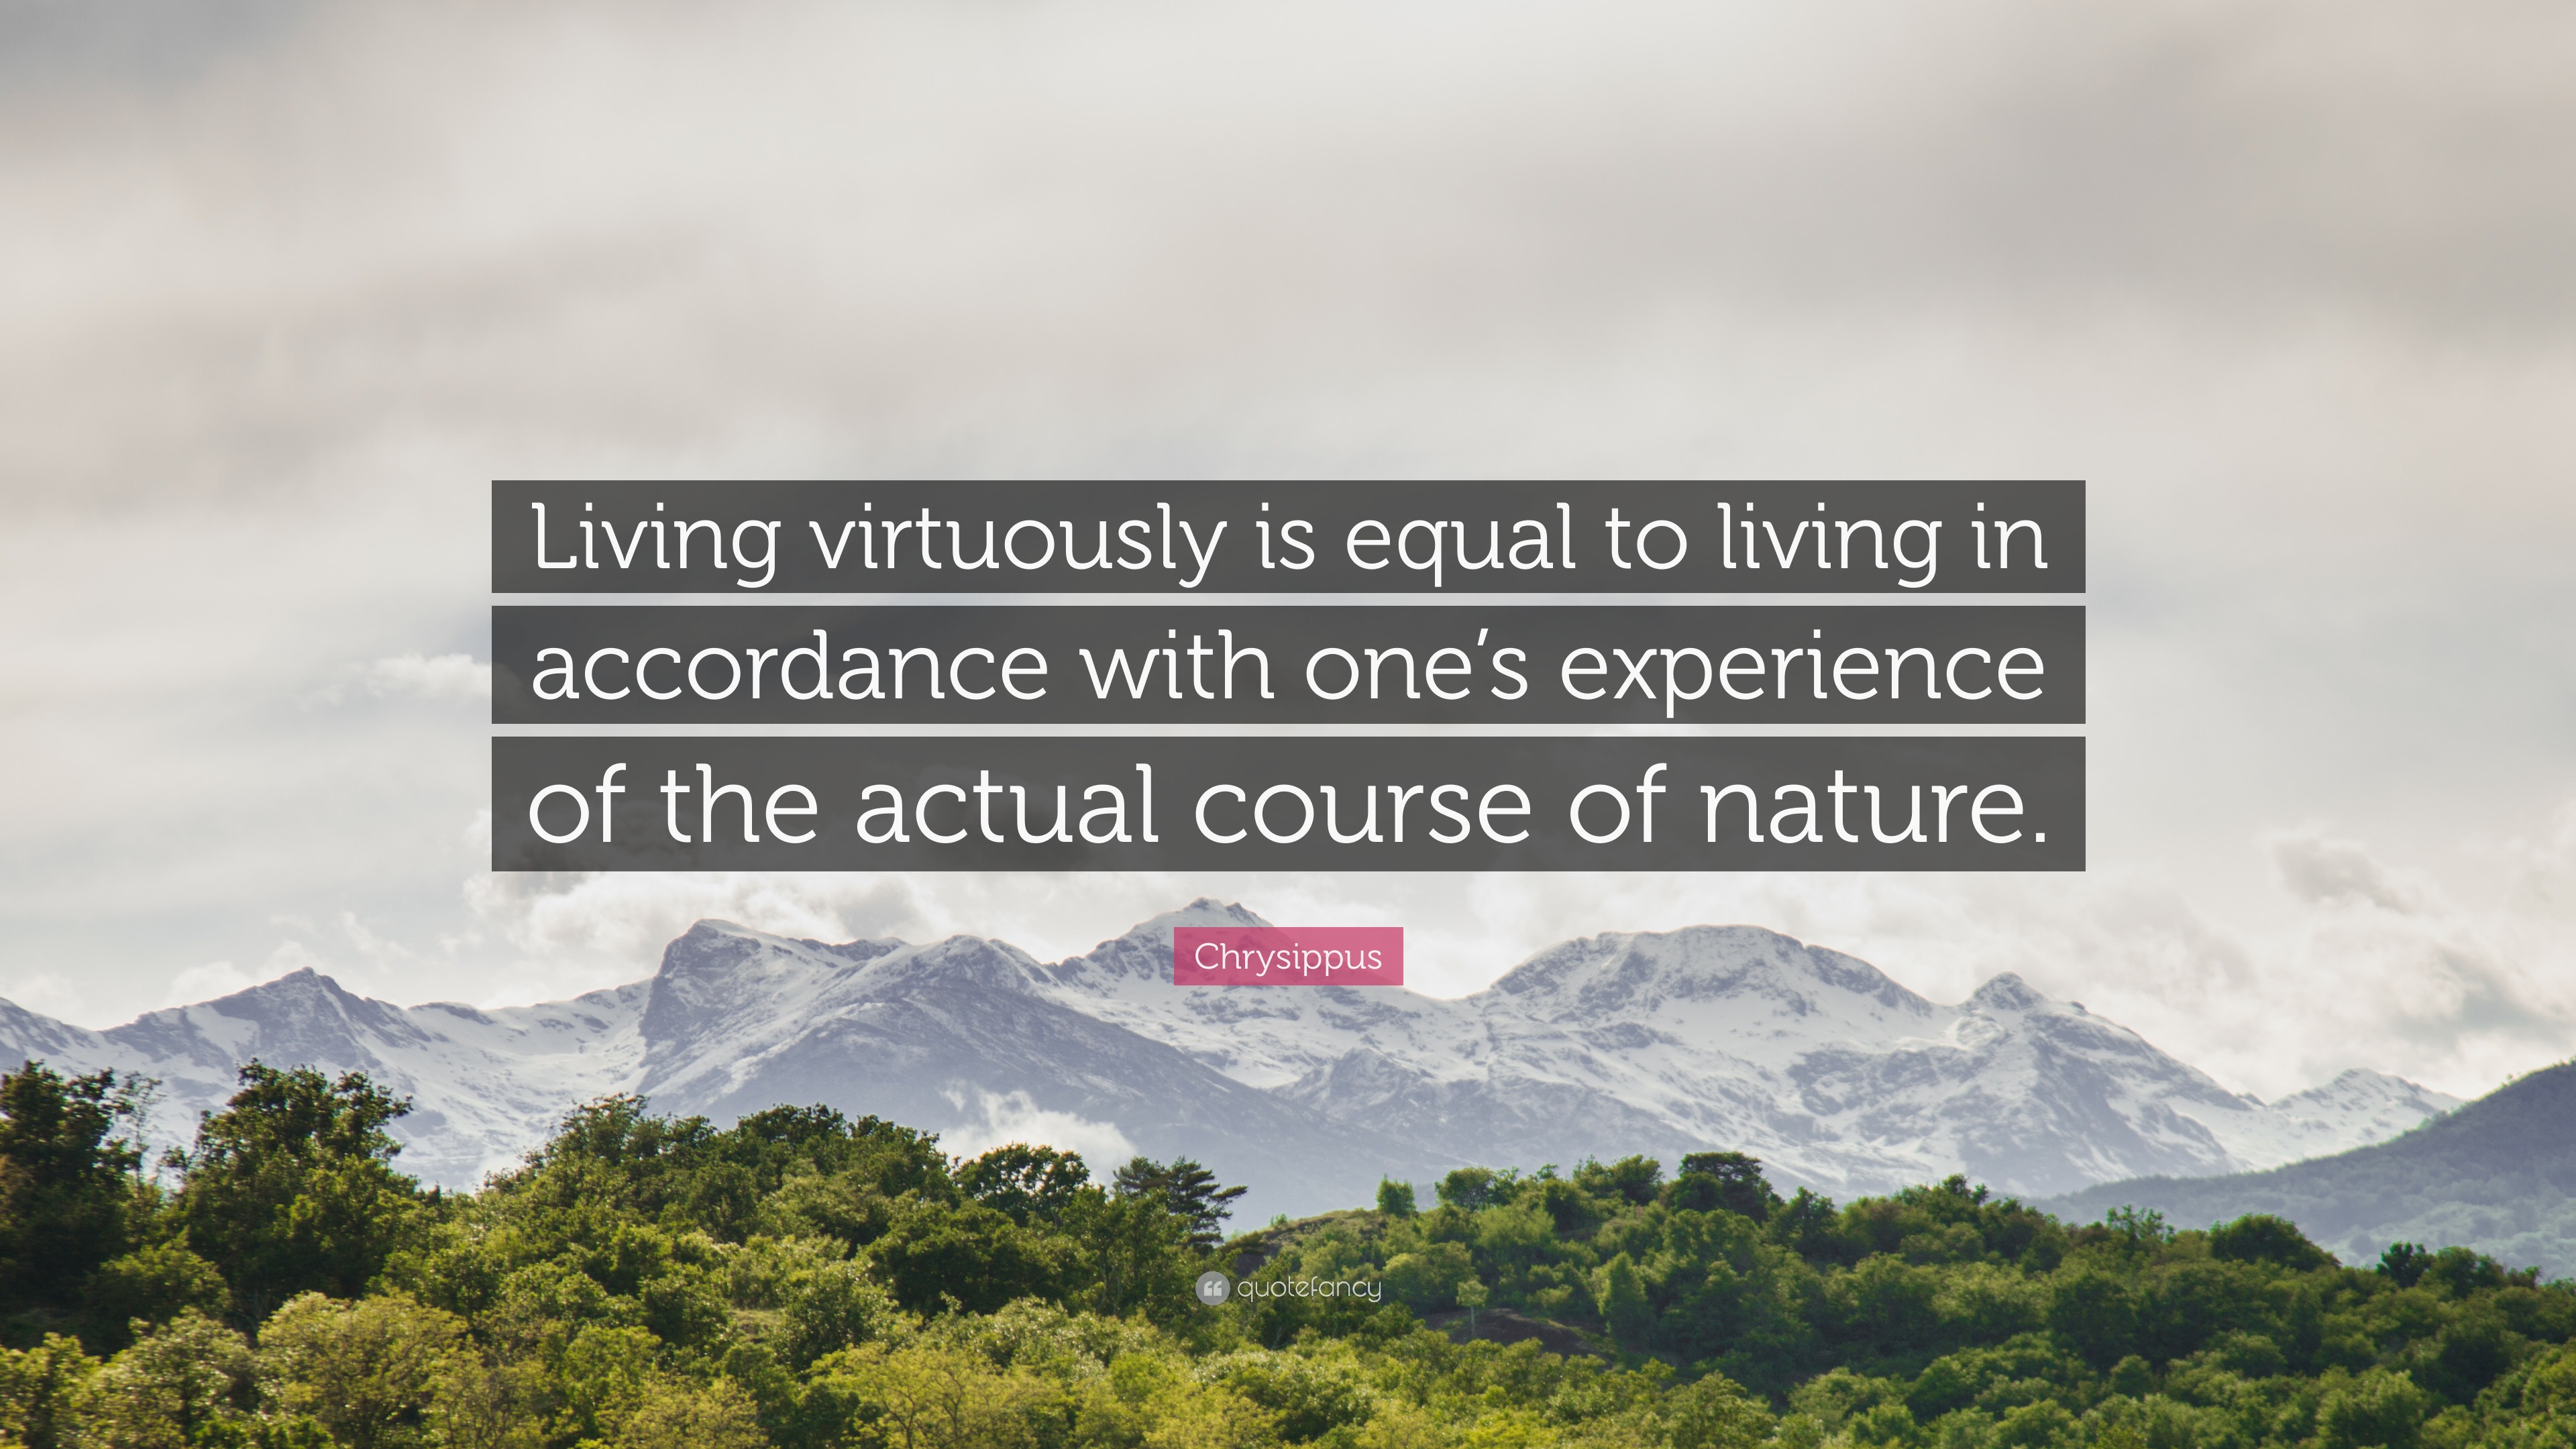 Chrysippus “Living virtuously is equal to living in with one's experience of the